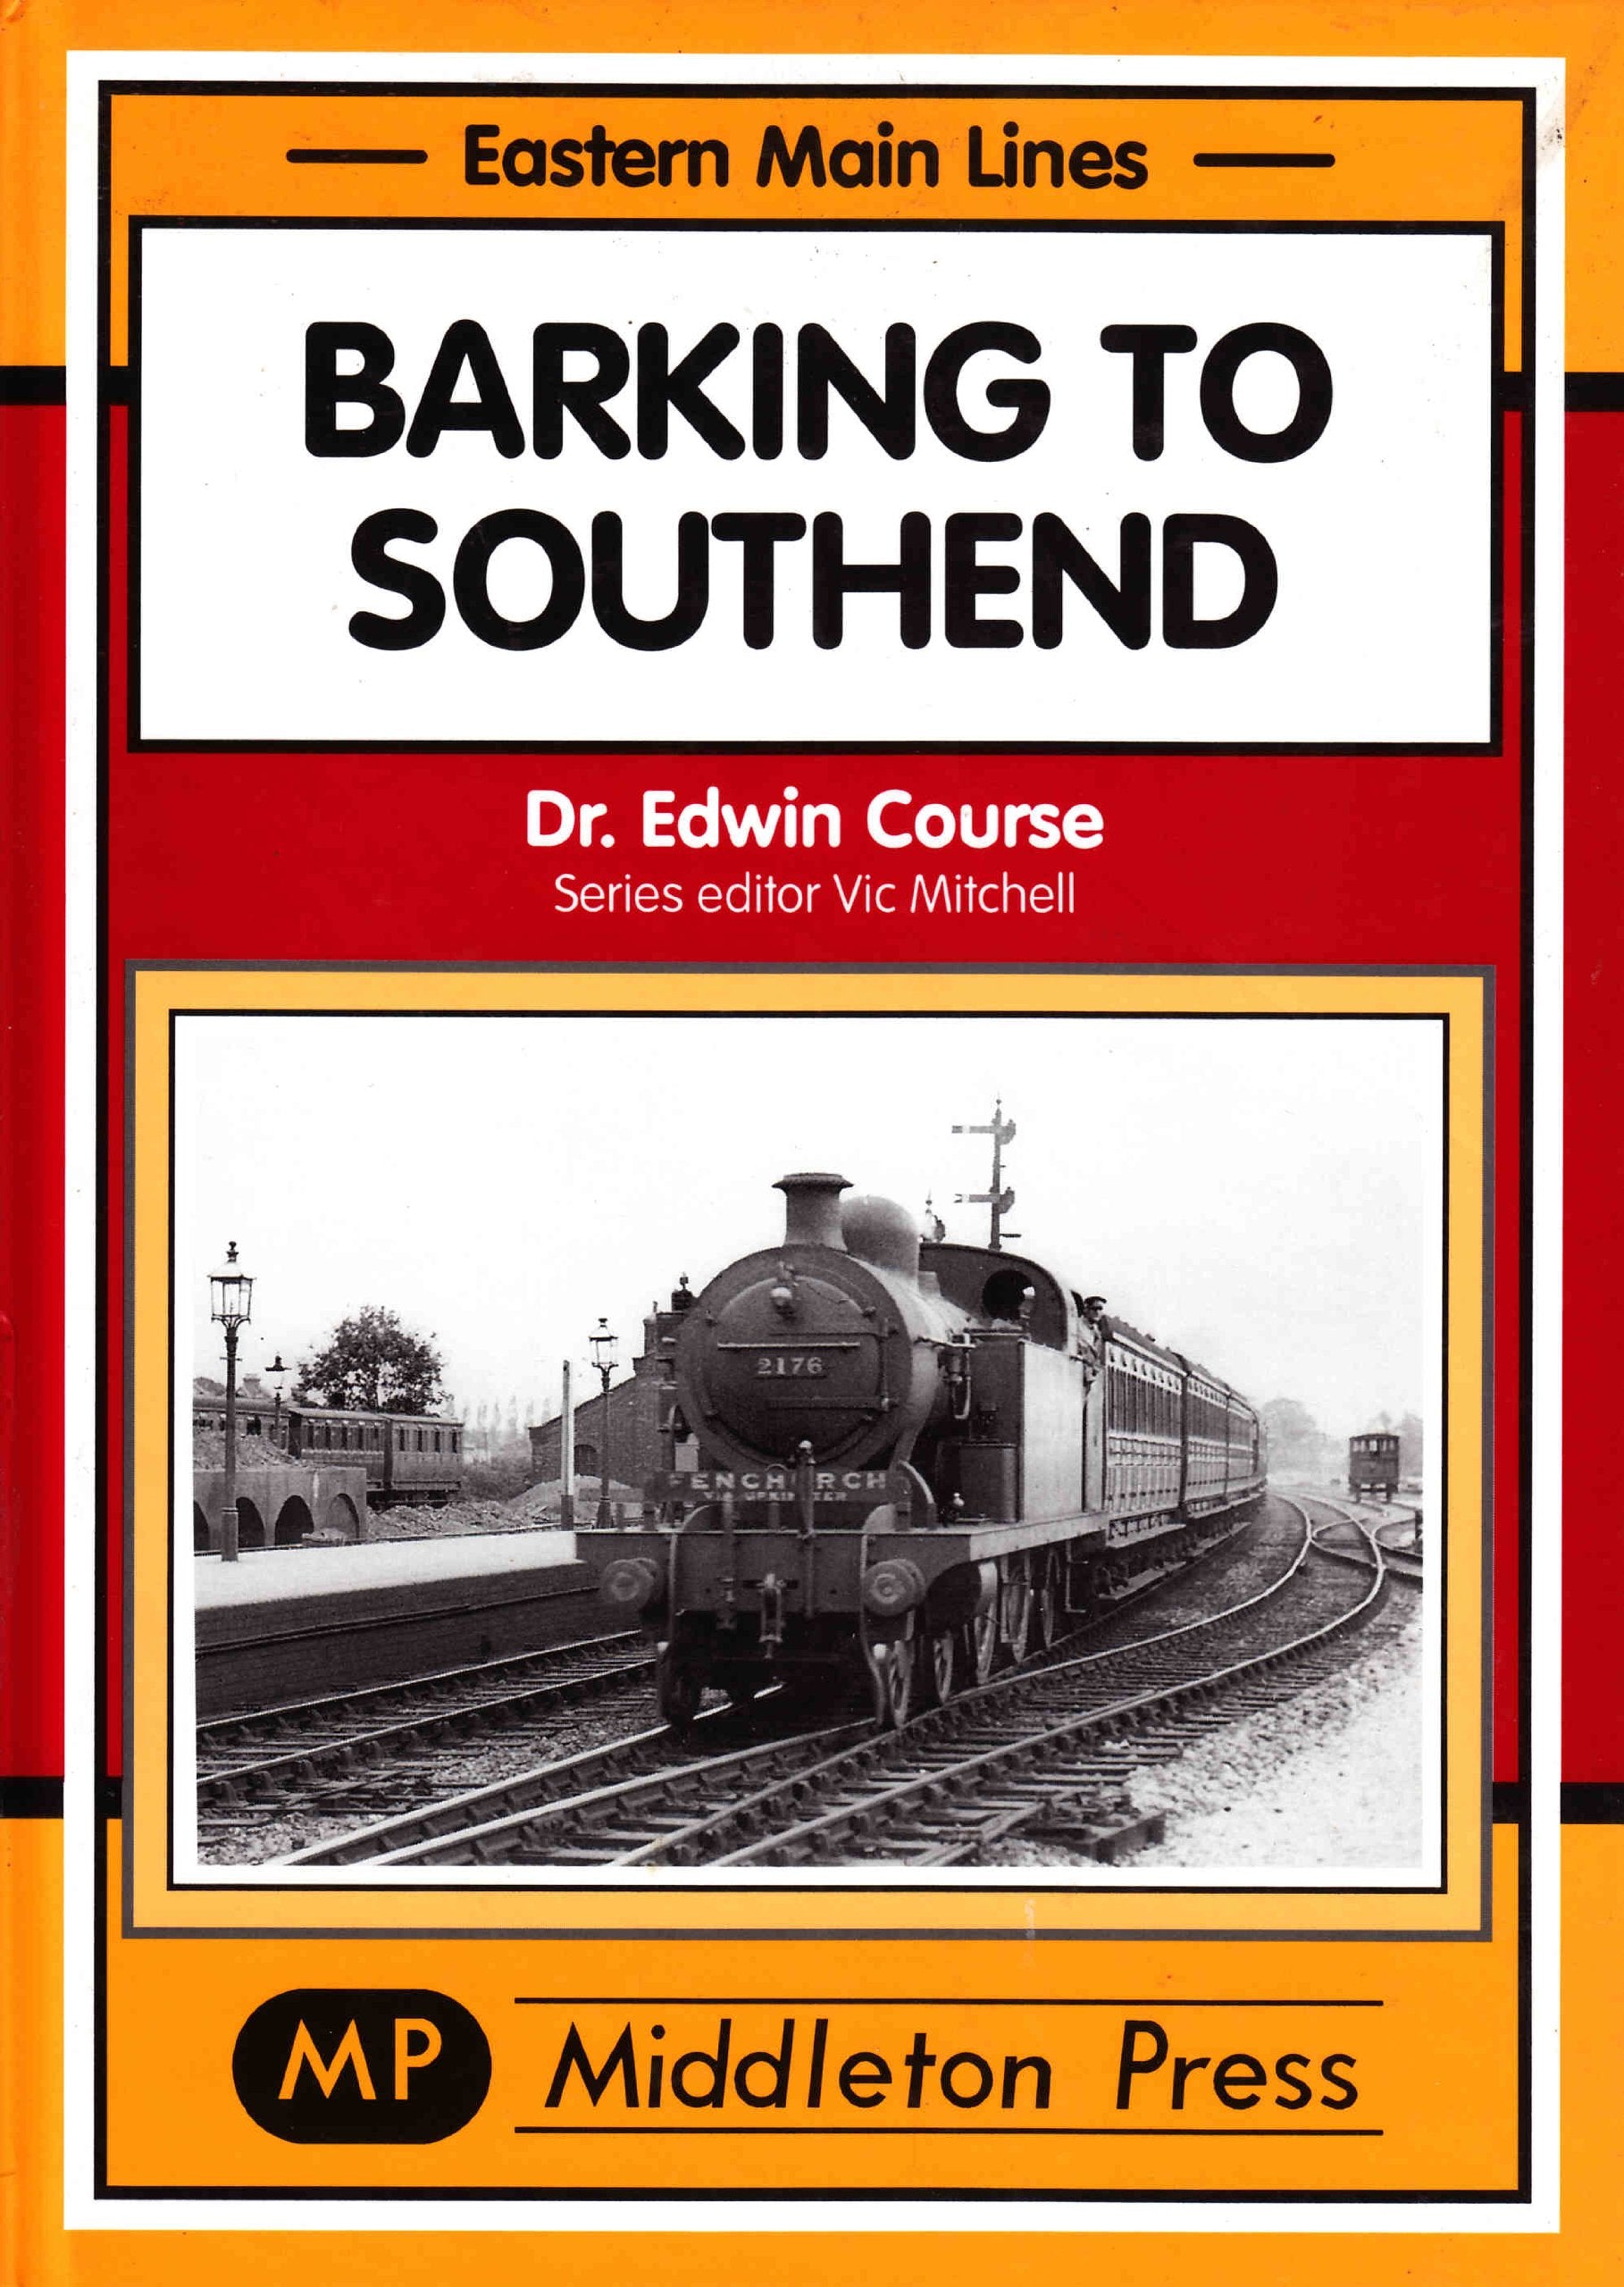 Eastern Main Lines Barking to Southend